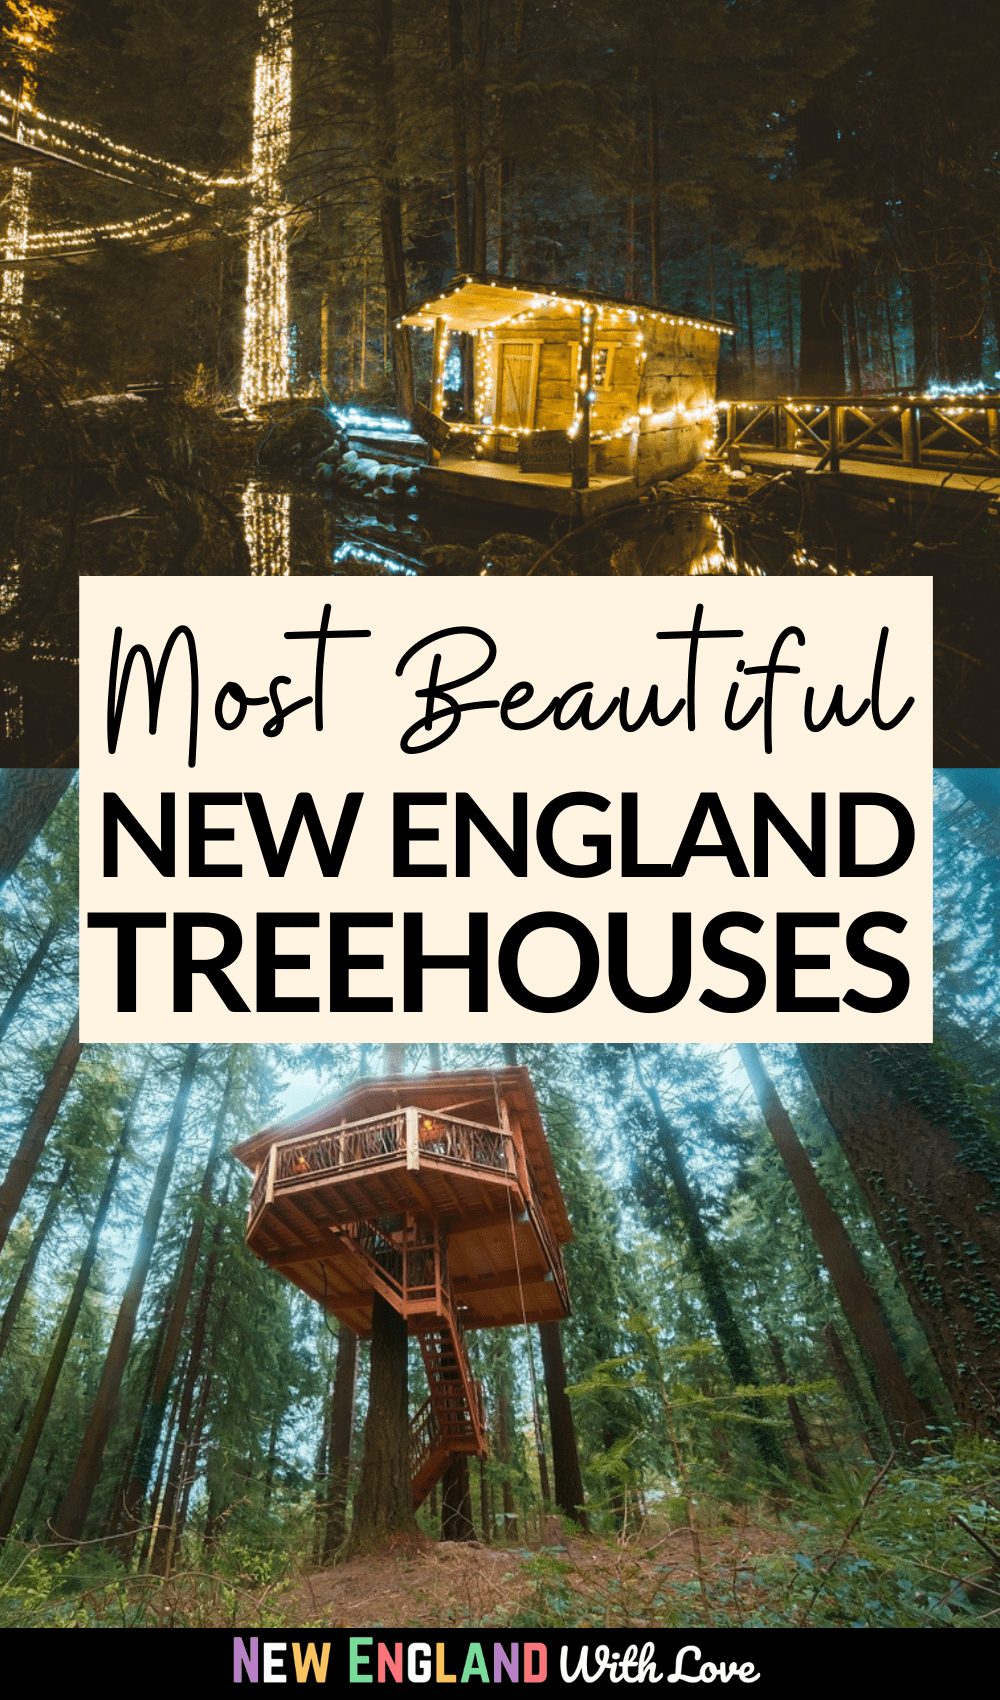 Pinterest graphic reading "Most Beautiful New England Treehouses"